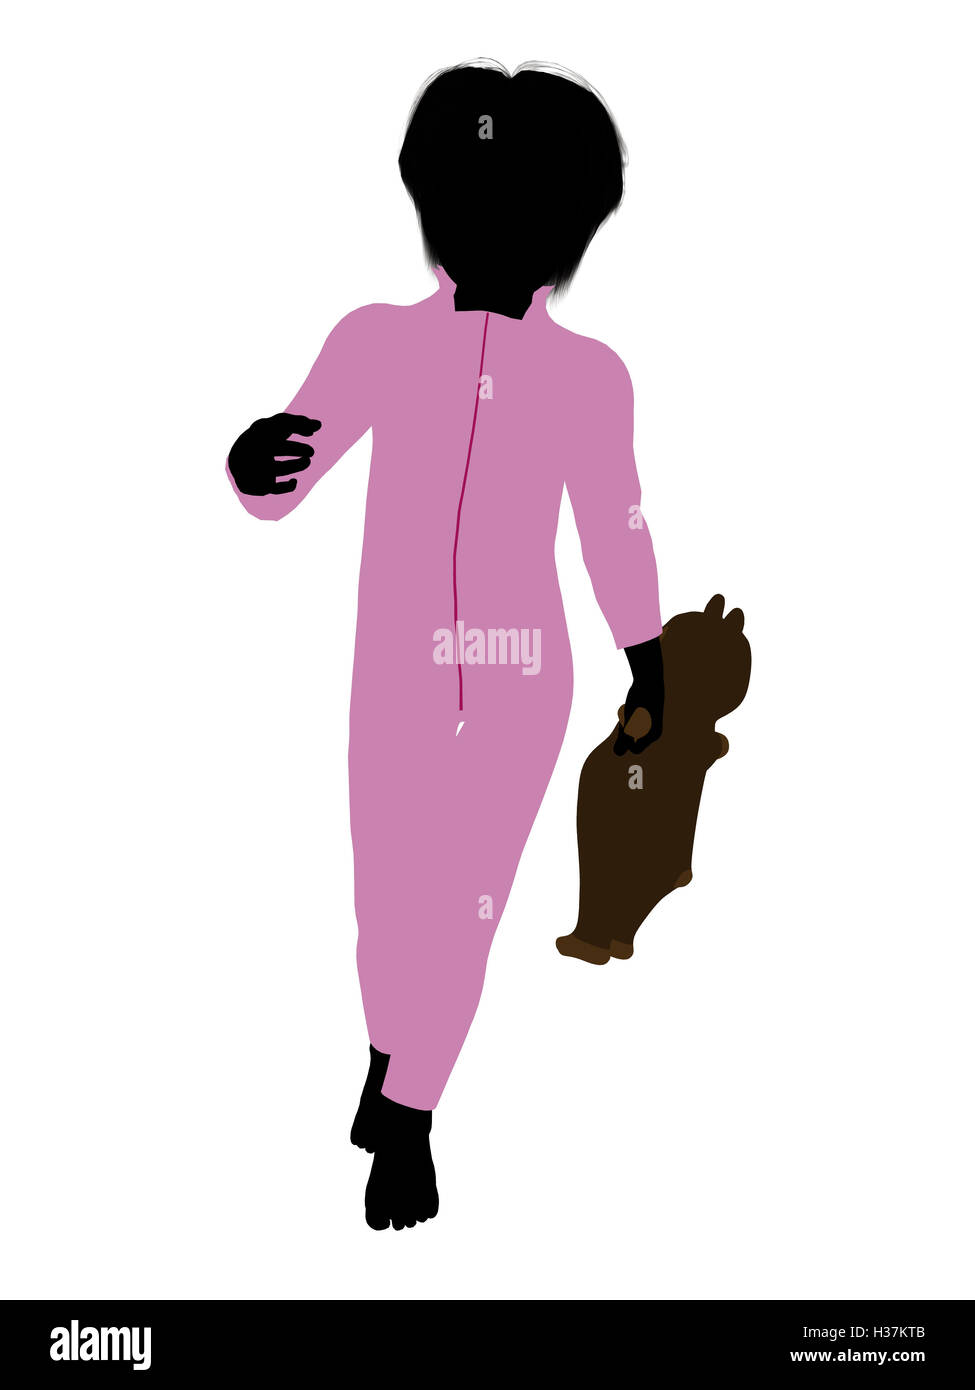 Peter of Peter Pan Silhouette Illustration Stock Photo